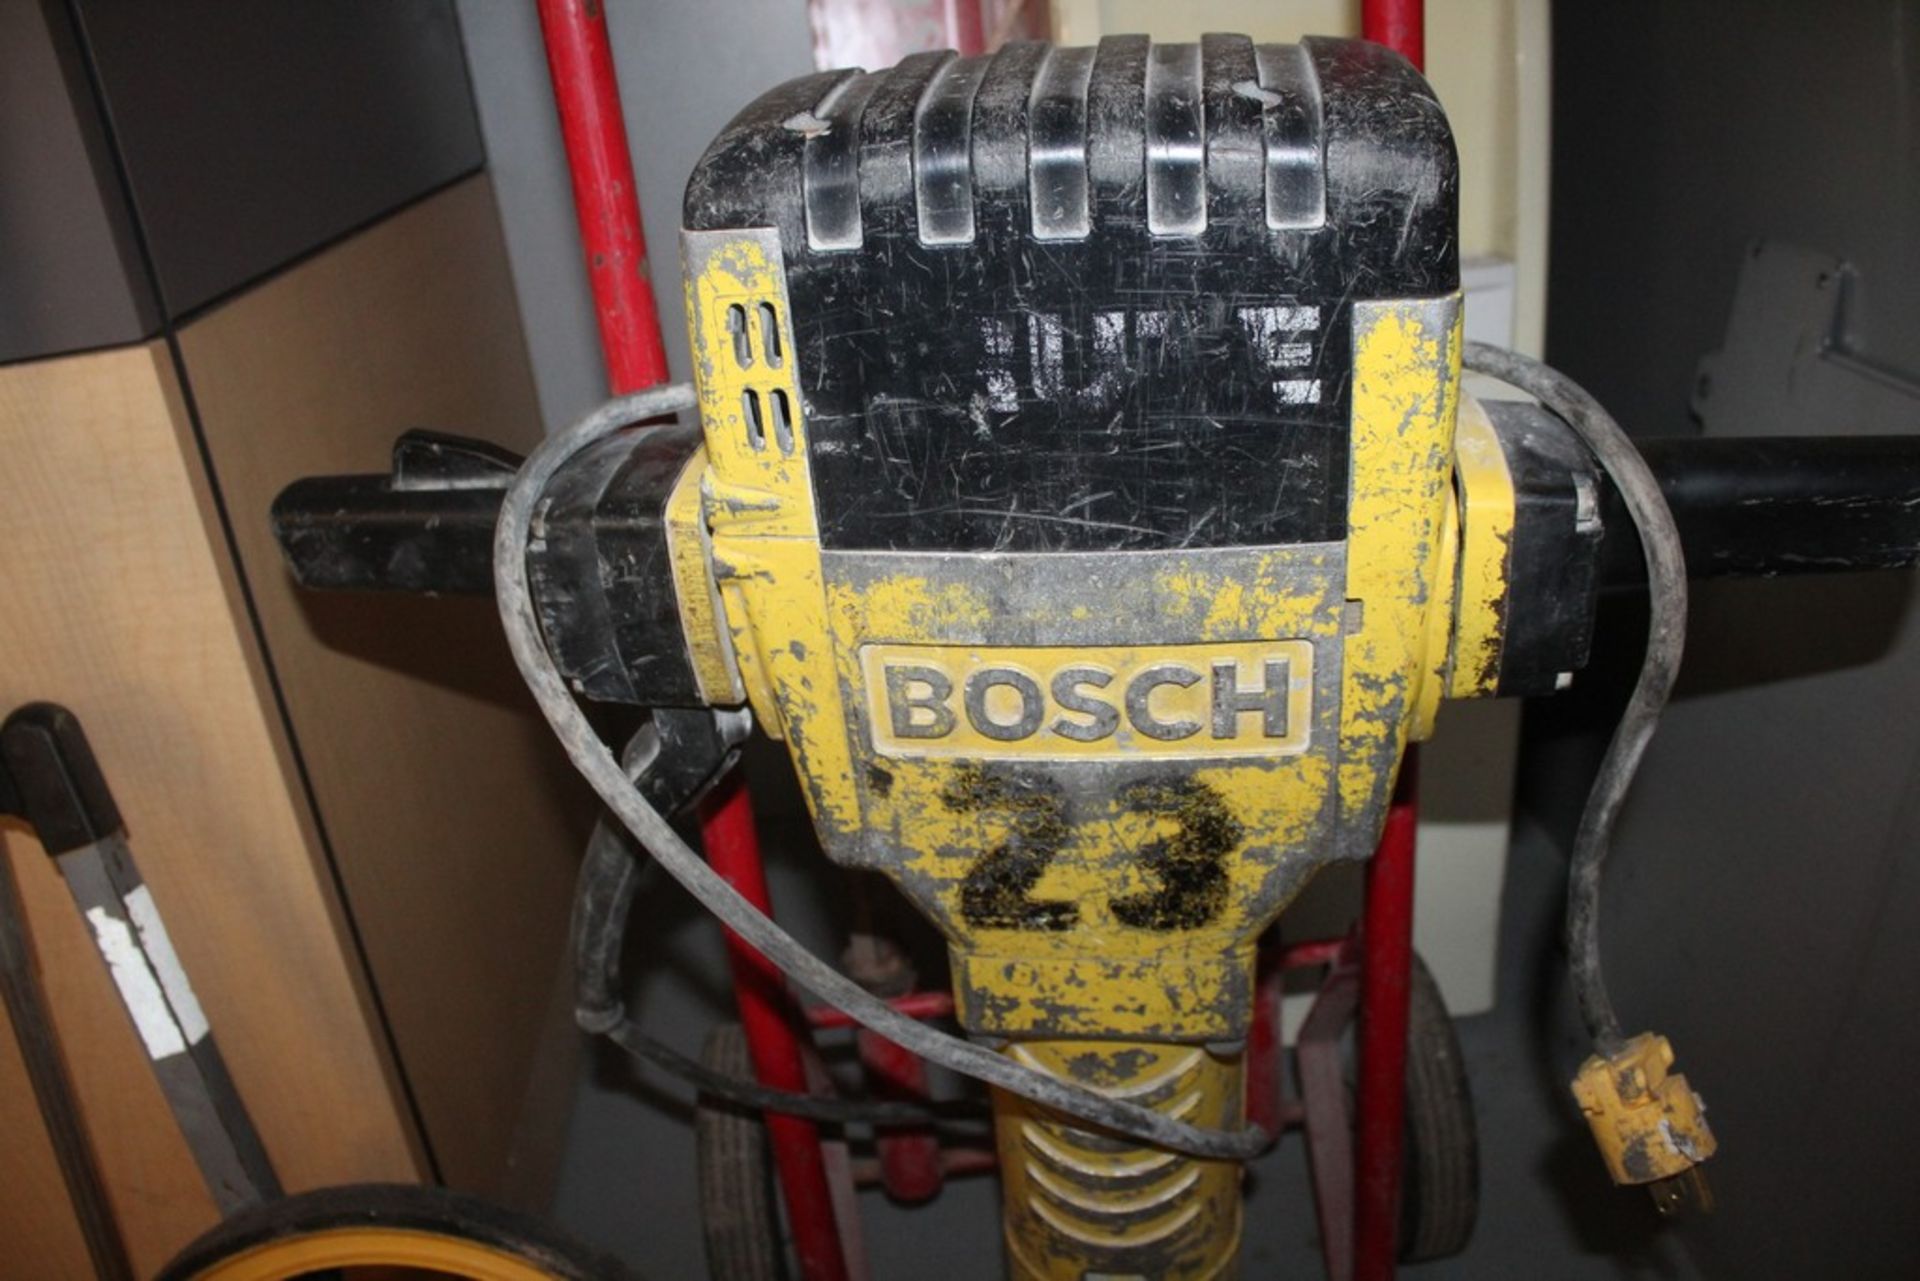 BOSCH ELECTRIC JACK HAMMER, WITH BITS AND DOLLY - Image 2 of 3